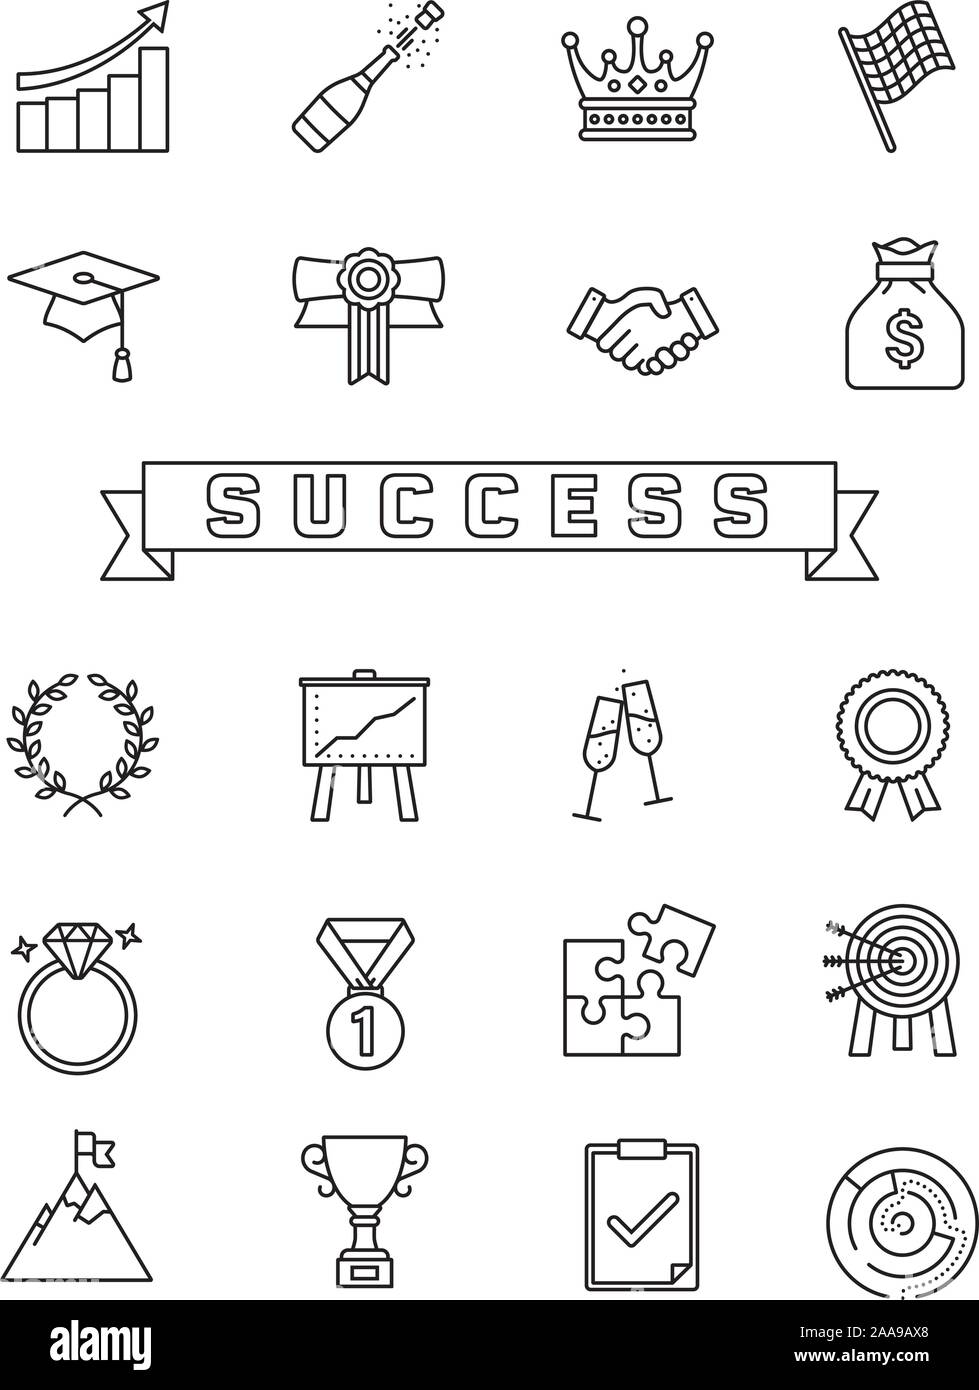 Collection of success concept line icons like awards, champagne, target and mortarboard. Outline vector symbols illustration. Stock Vector